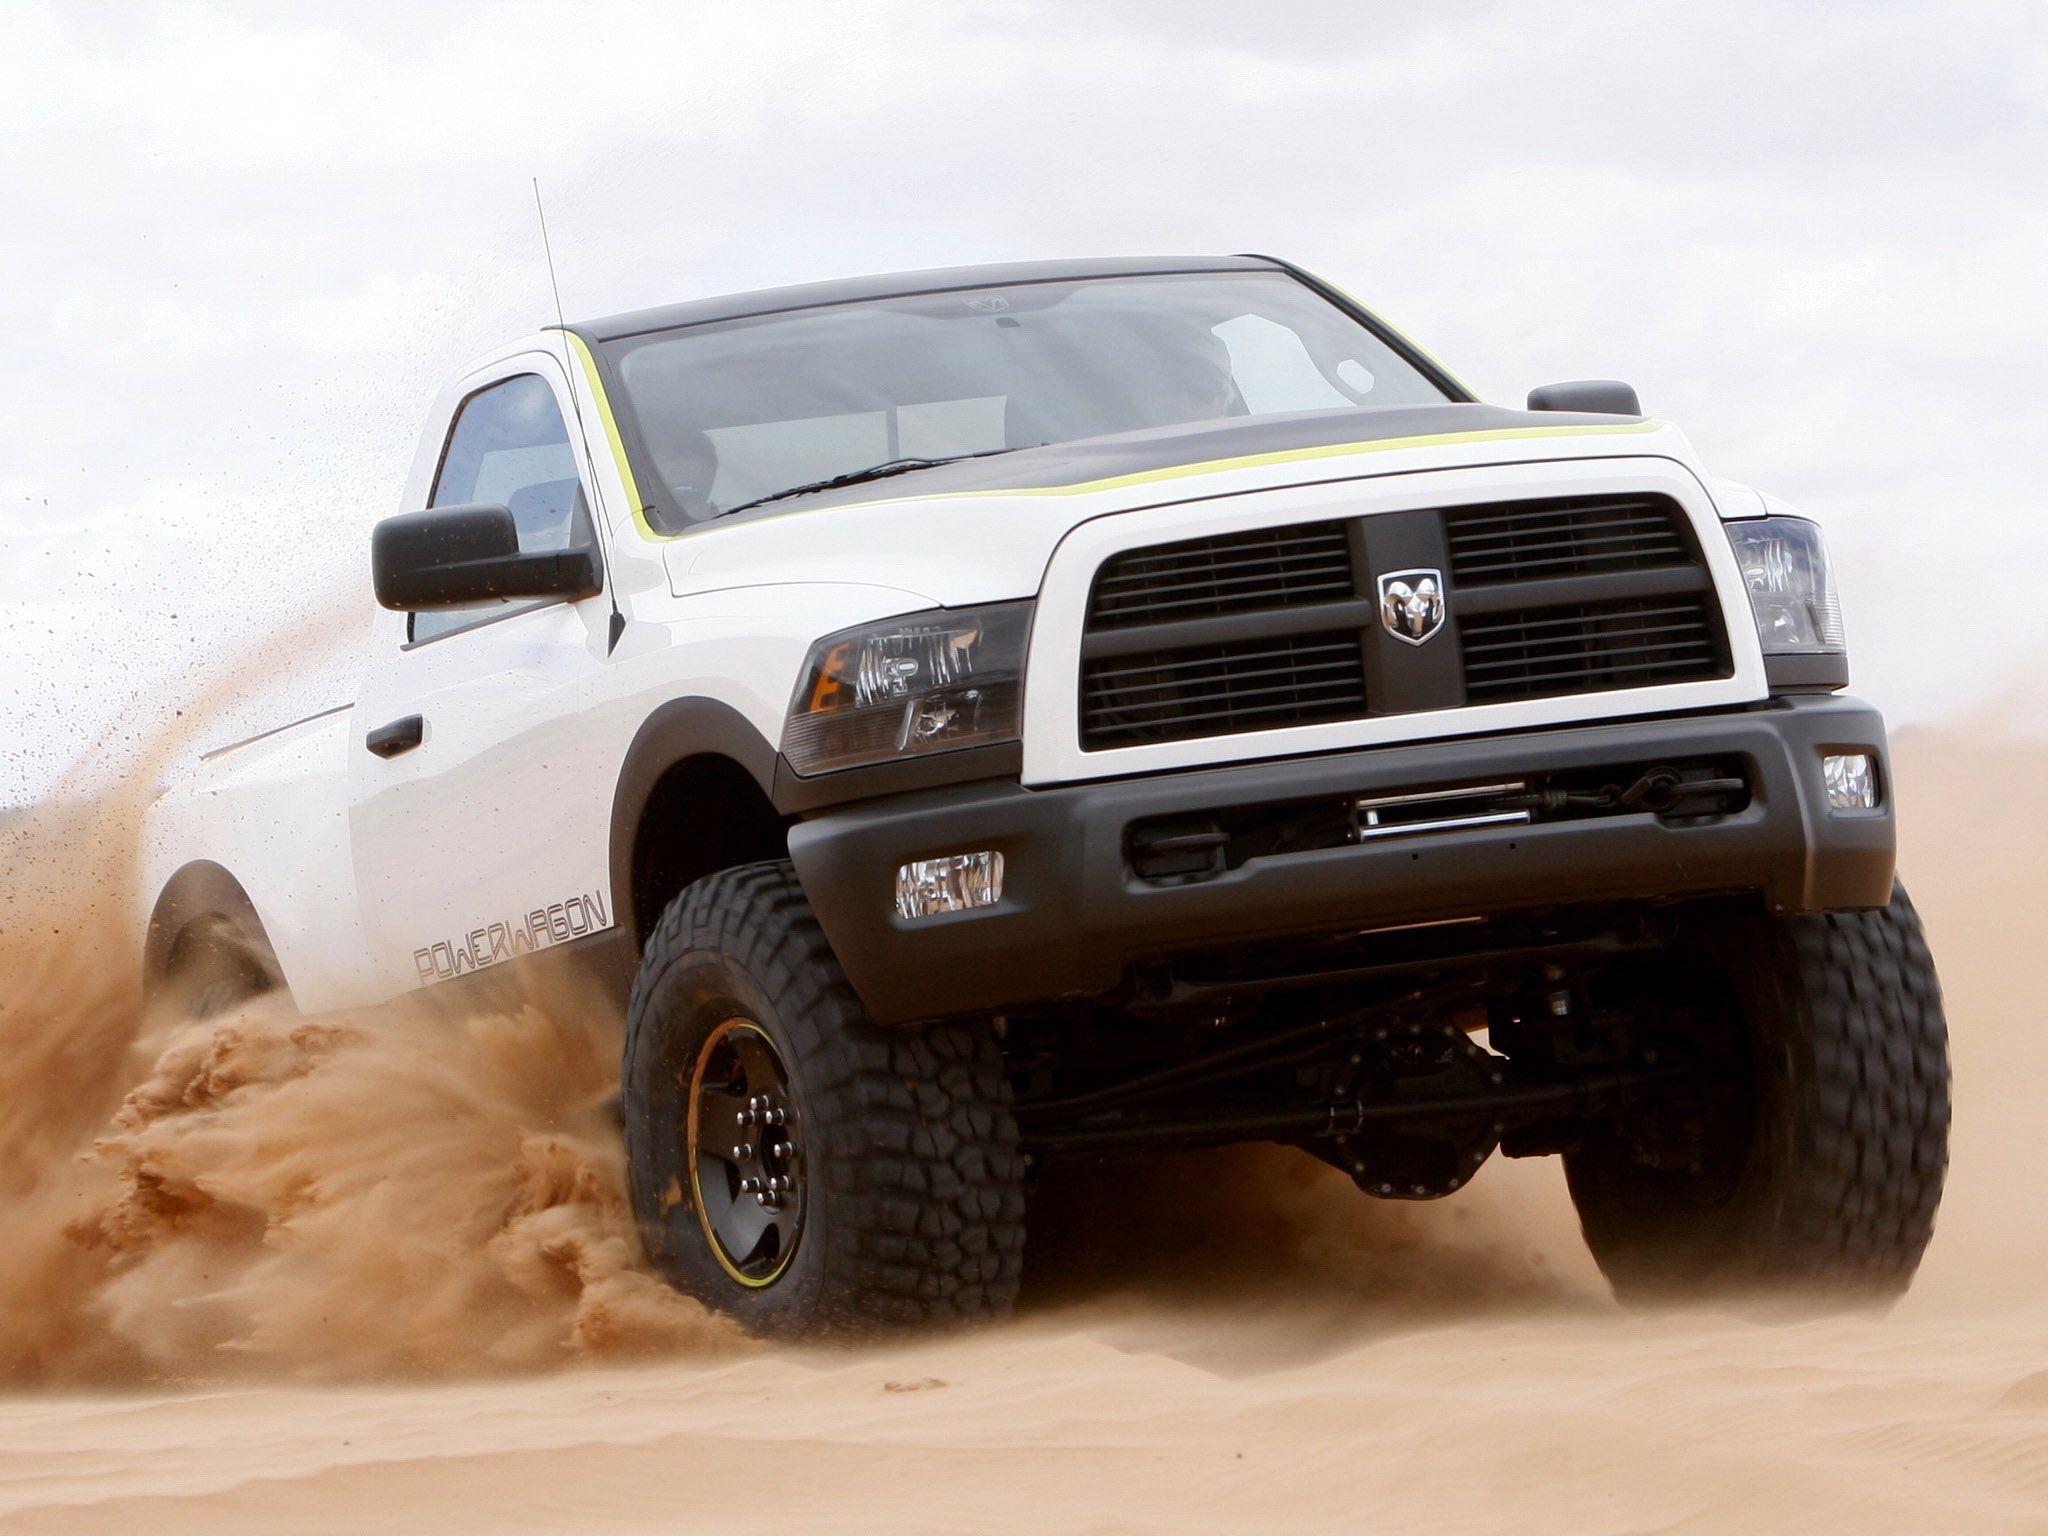 Lifted Dodge Truck Wallpaper Image Gallery